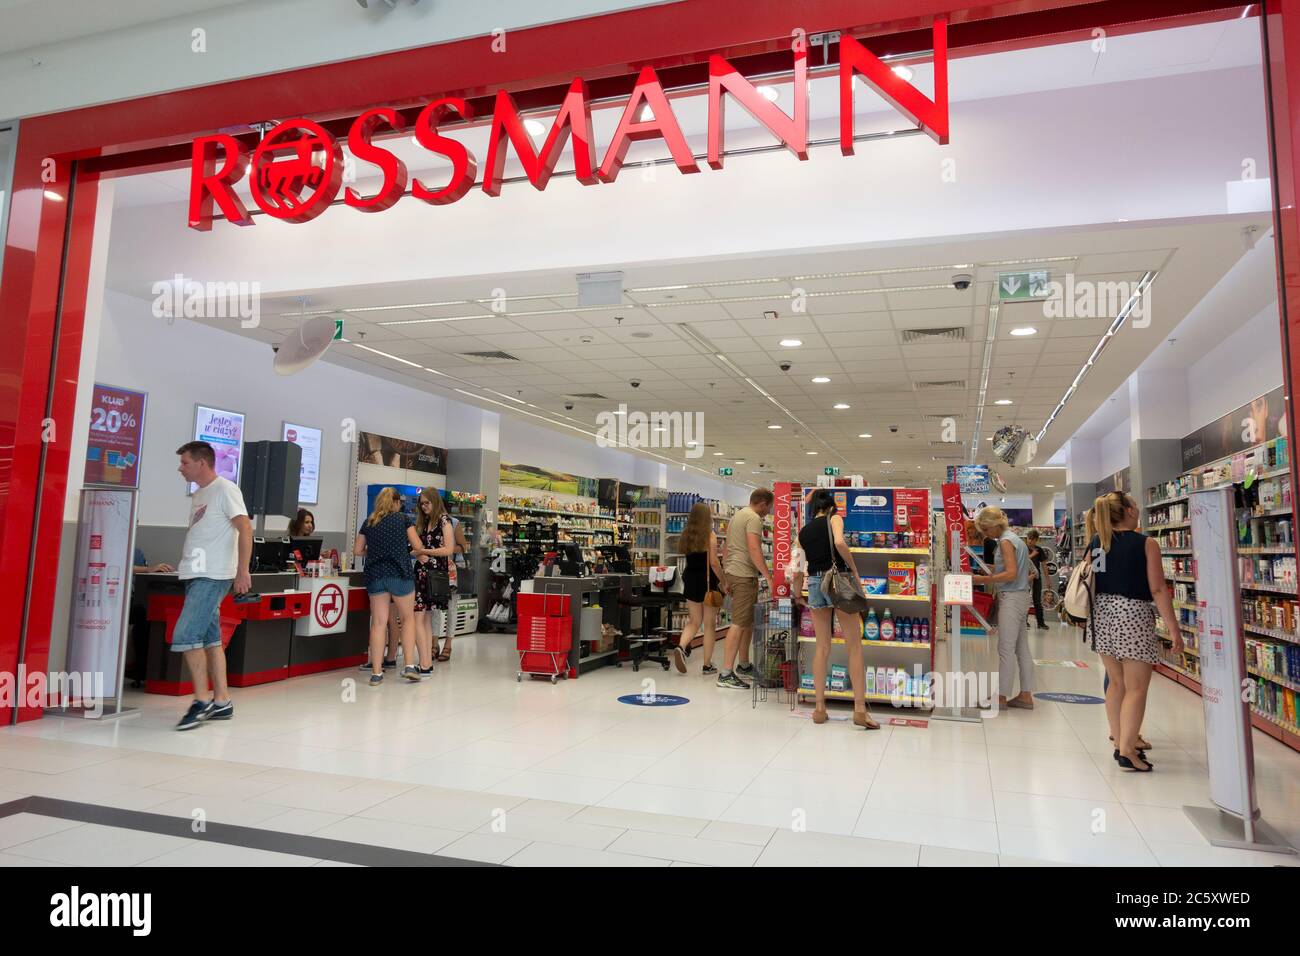 Rossmann Drugstore High Resolution Stock Photography And Images Alamy